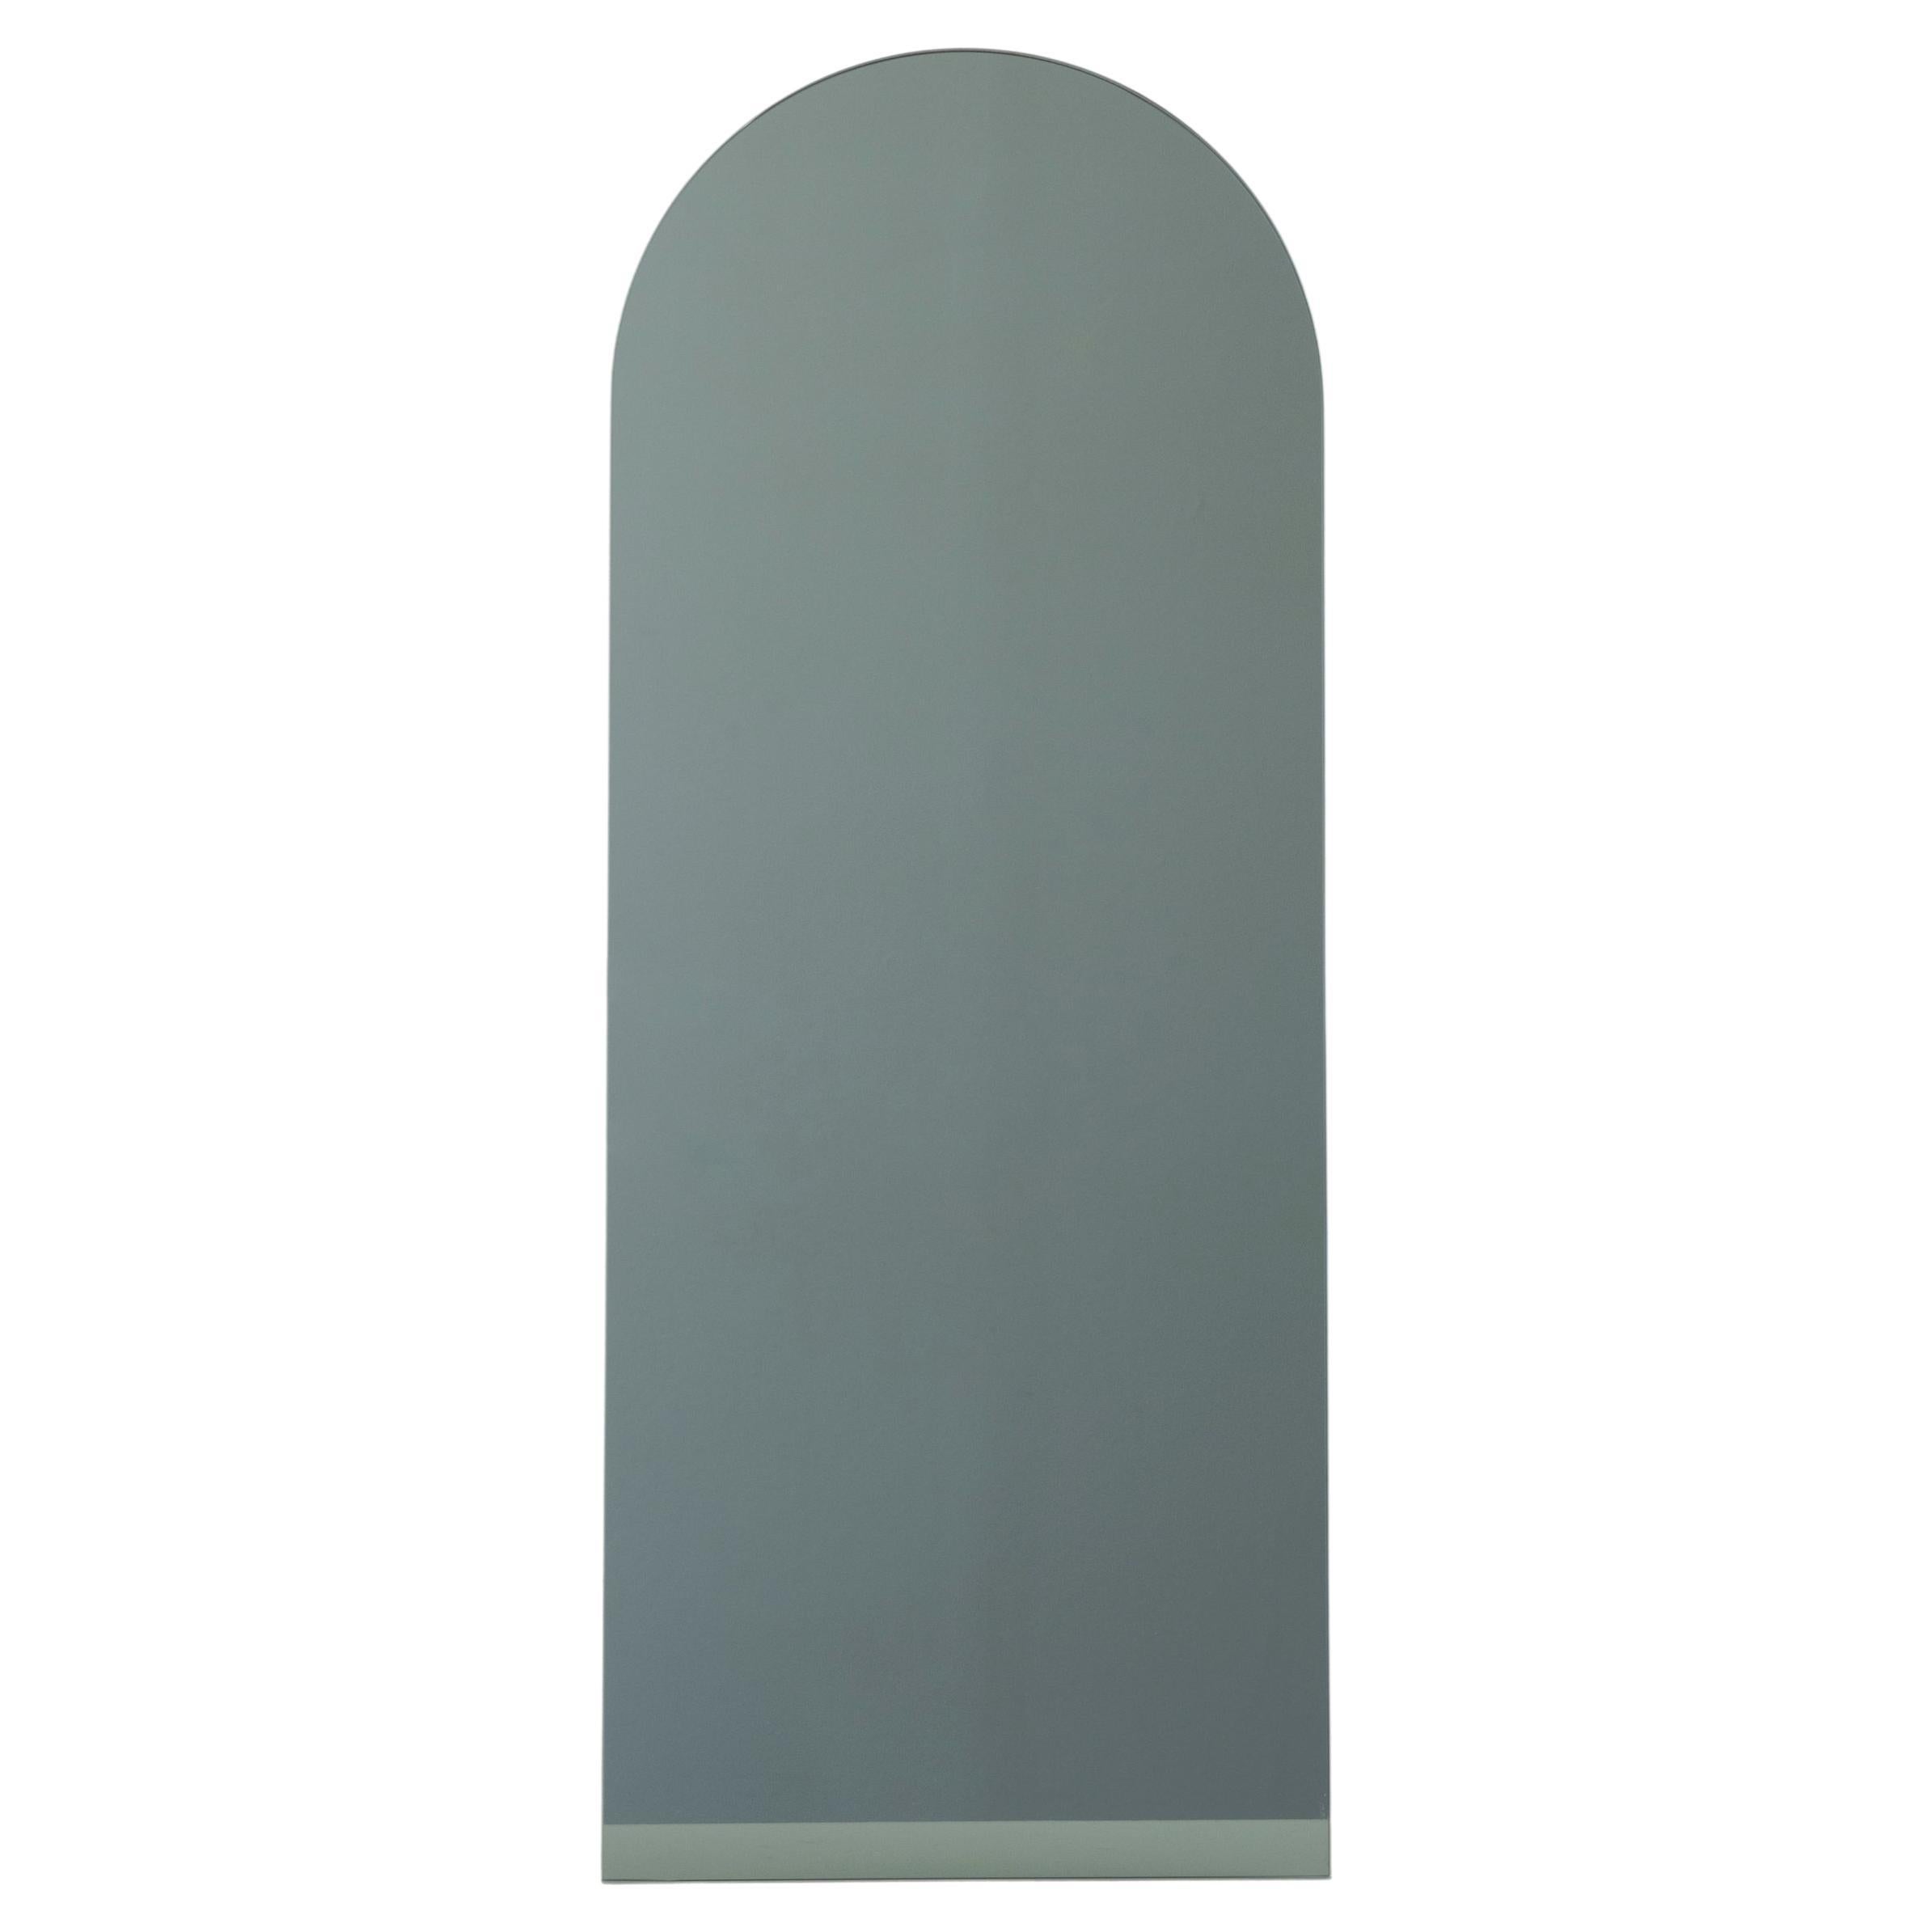 Arcus Black Tinted Arched Minimalist Frameless Mirror Floating Effect, Medium For Sale